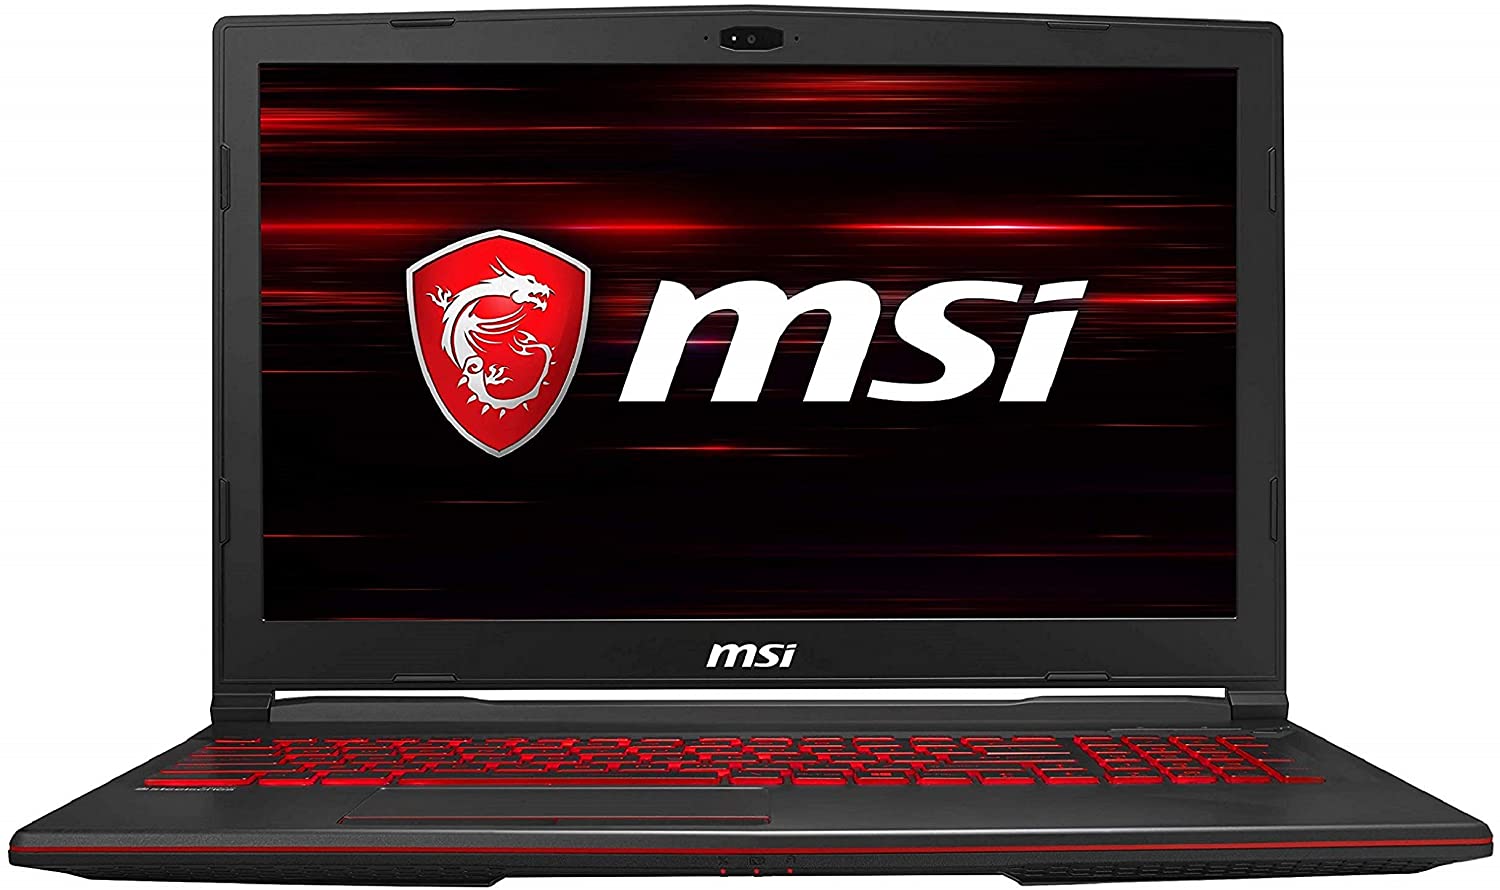 best laptop under 1 lakh rupees (MSI Gaming GL63 9SD-1044IN Laptop)